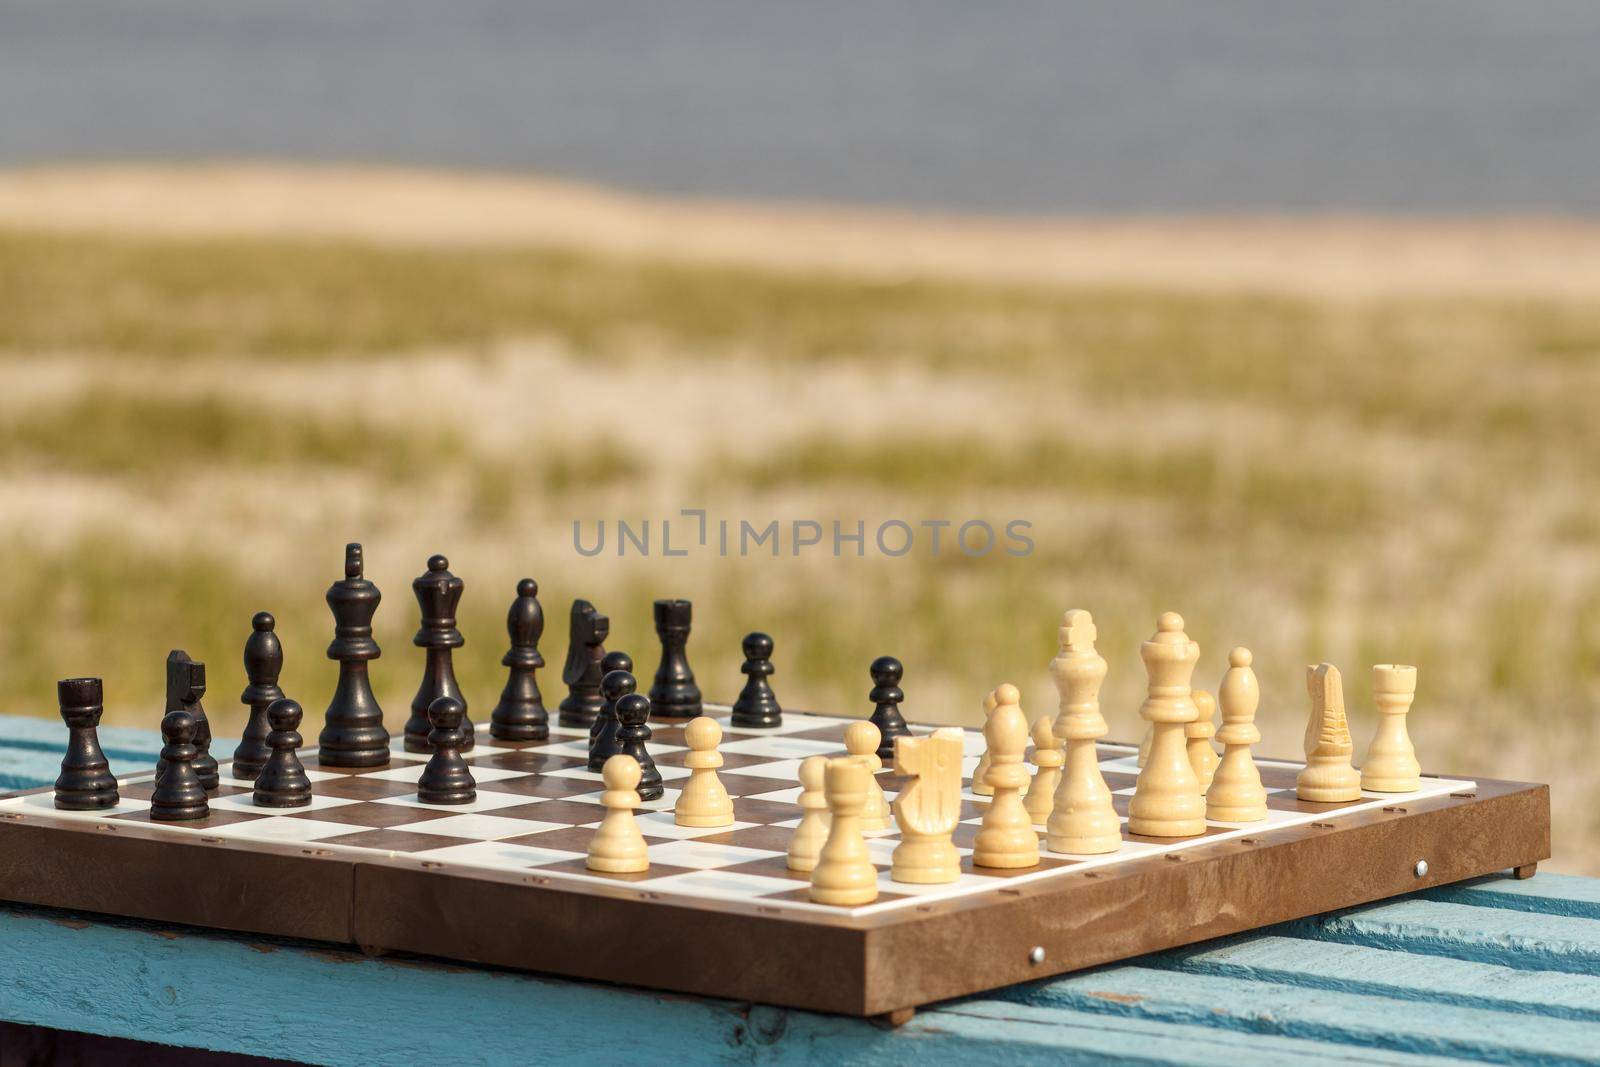 Chess board with chess pieces on wooden bench with river embankment background. Outdoors chess game